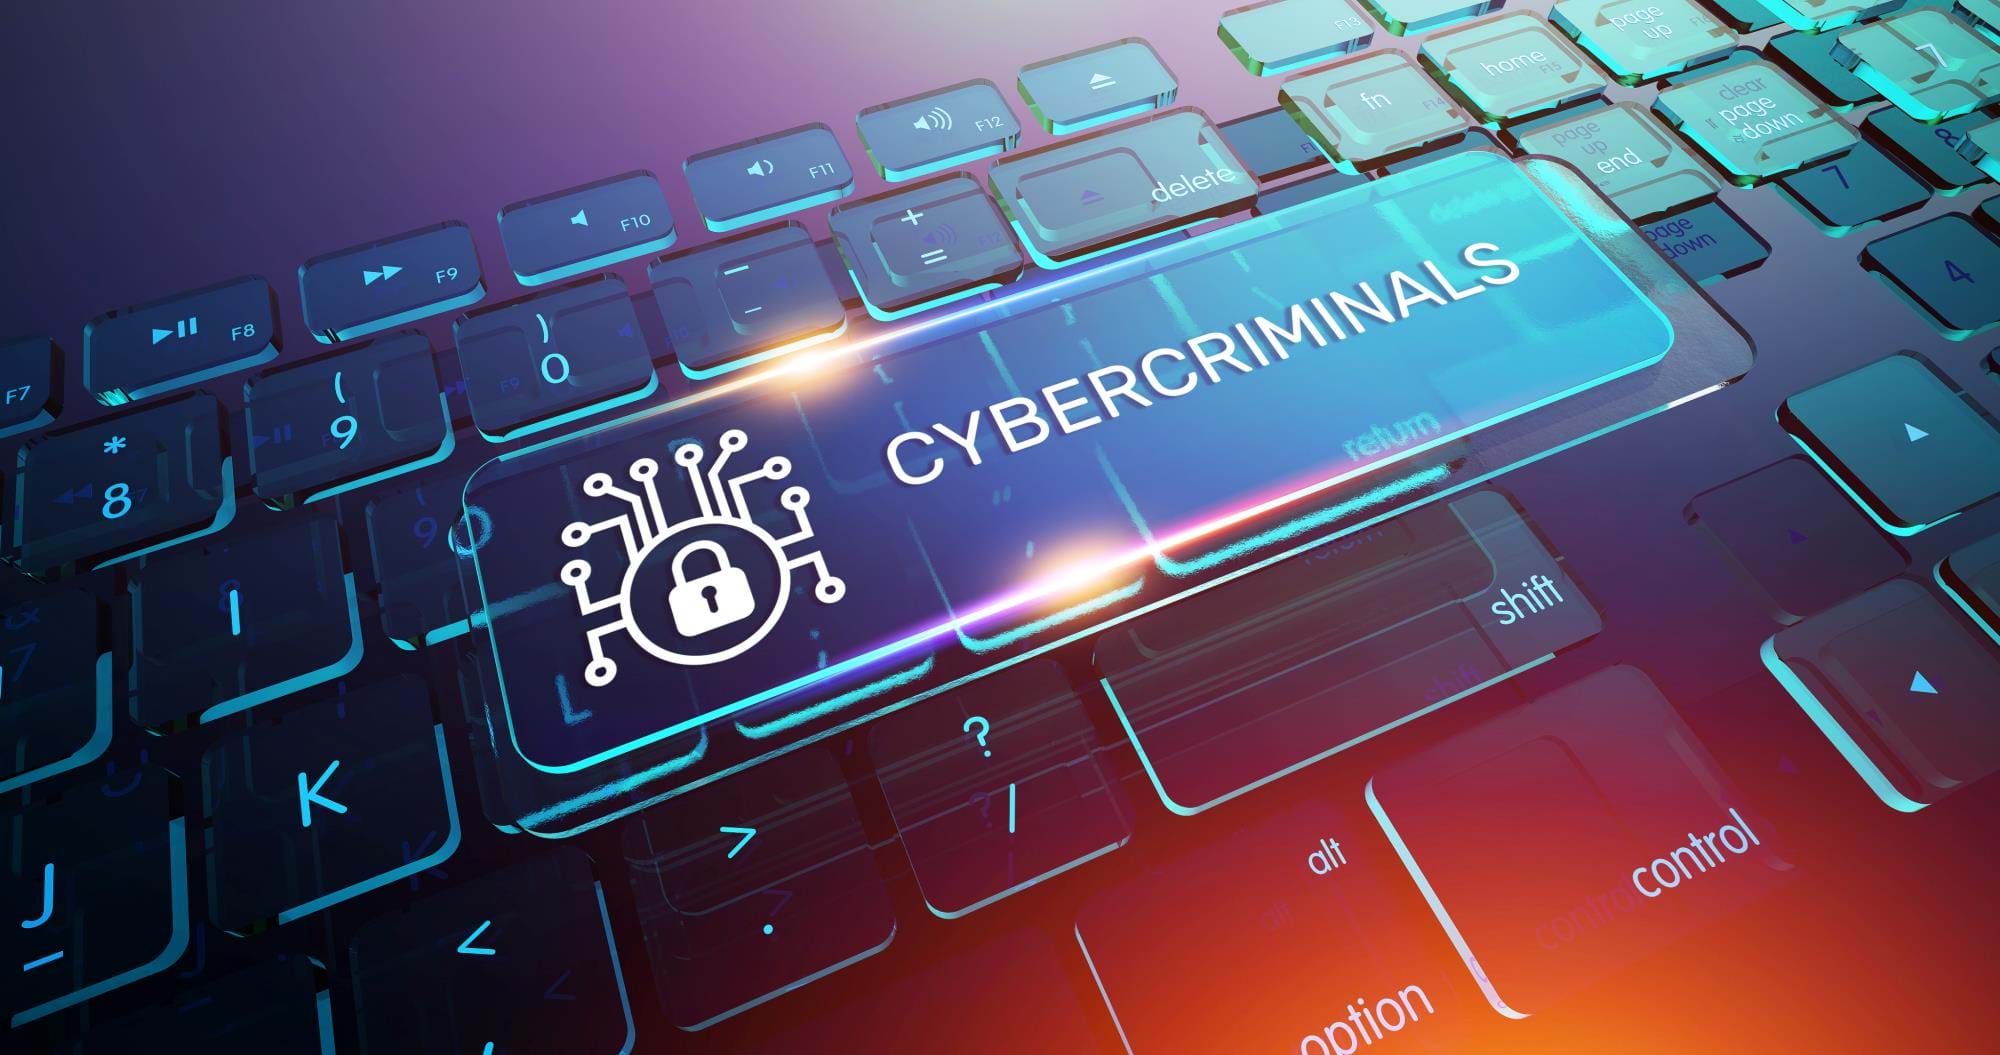 A New Era for Cybercriminals: Easy access to inexpensive, large scale computing solutions driving increased cyber liability risk